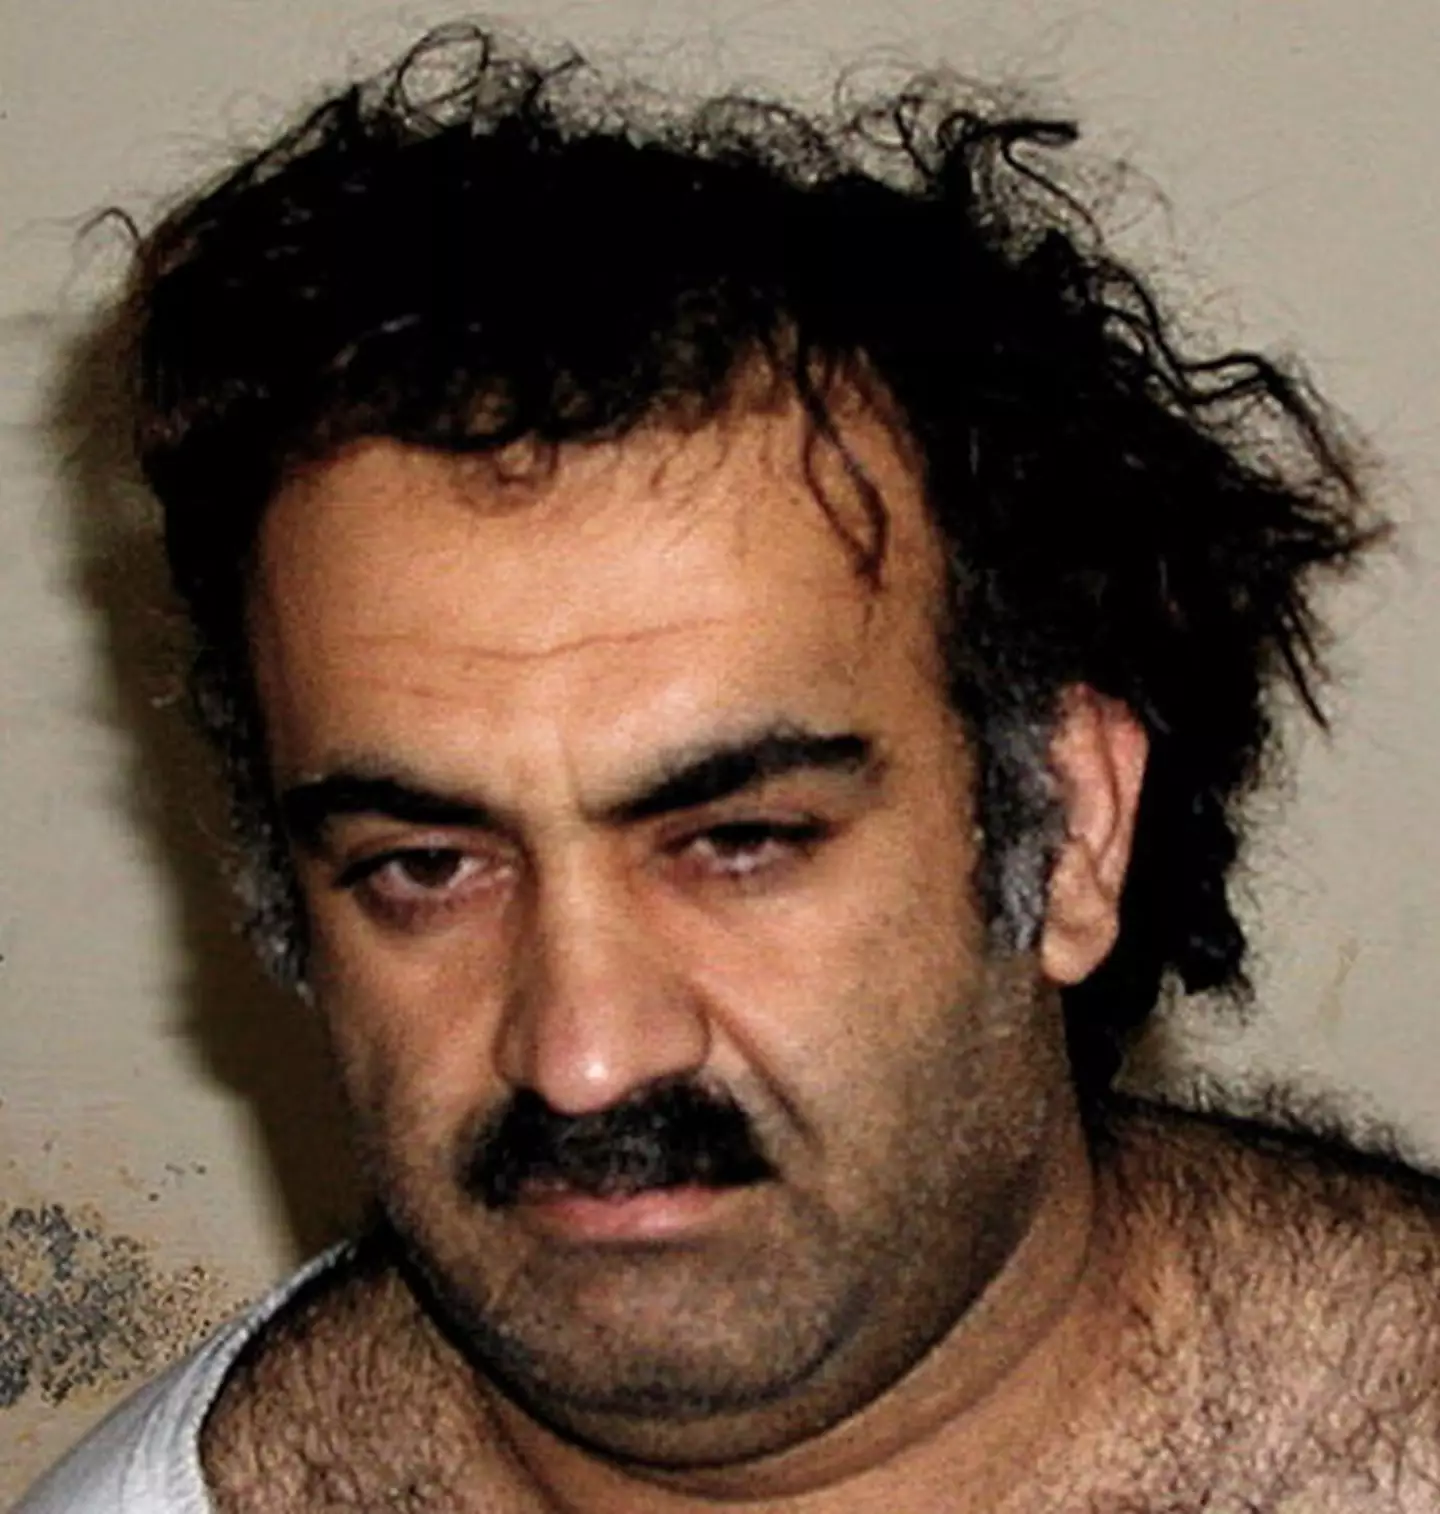 Khalid Sheikh Mohammed has been awaiting trial for almost 20 years.